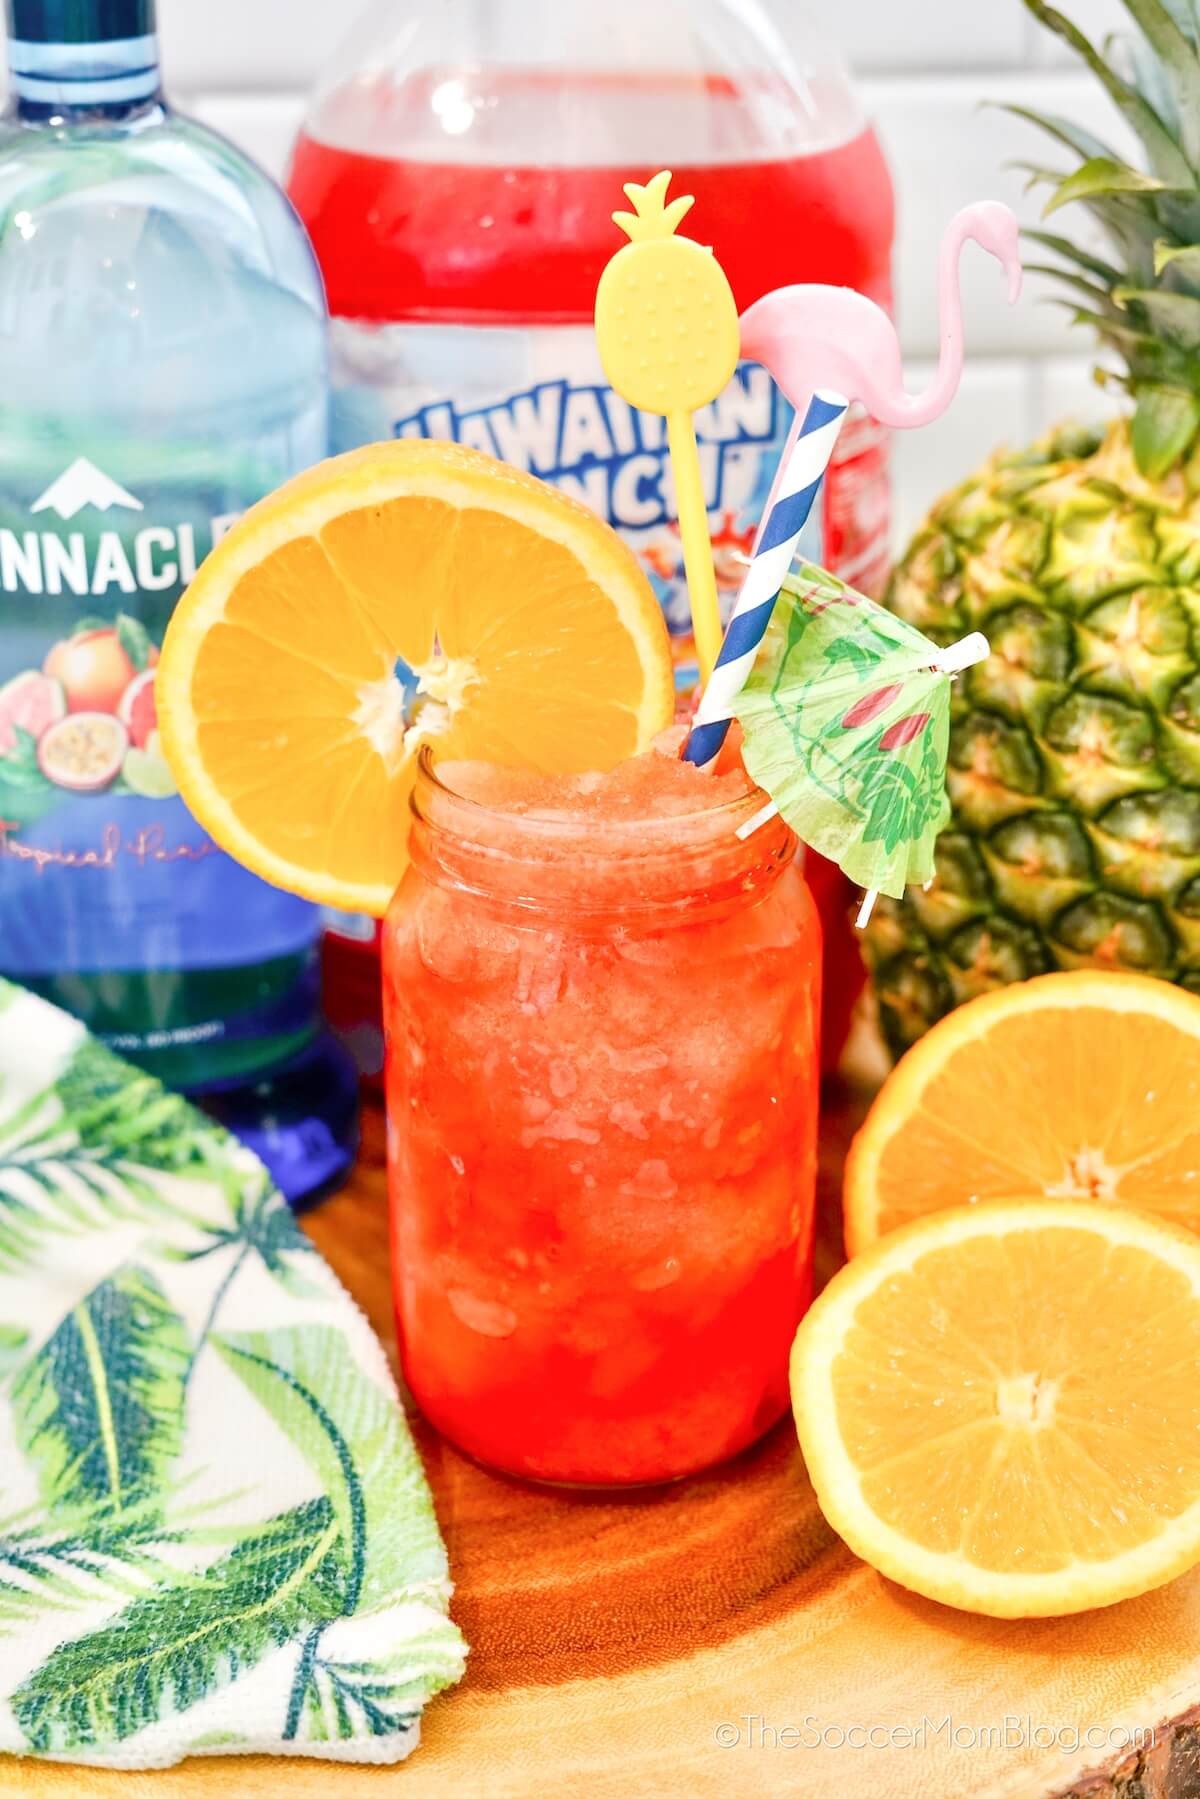 frozen Hawaiian punch cocktail in mason har, with vodka bottle, fruit punch jug, and fresh oranges